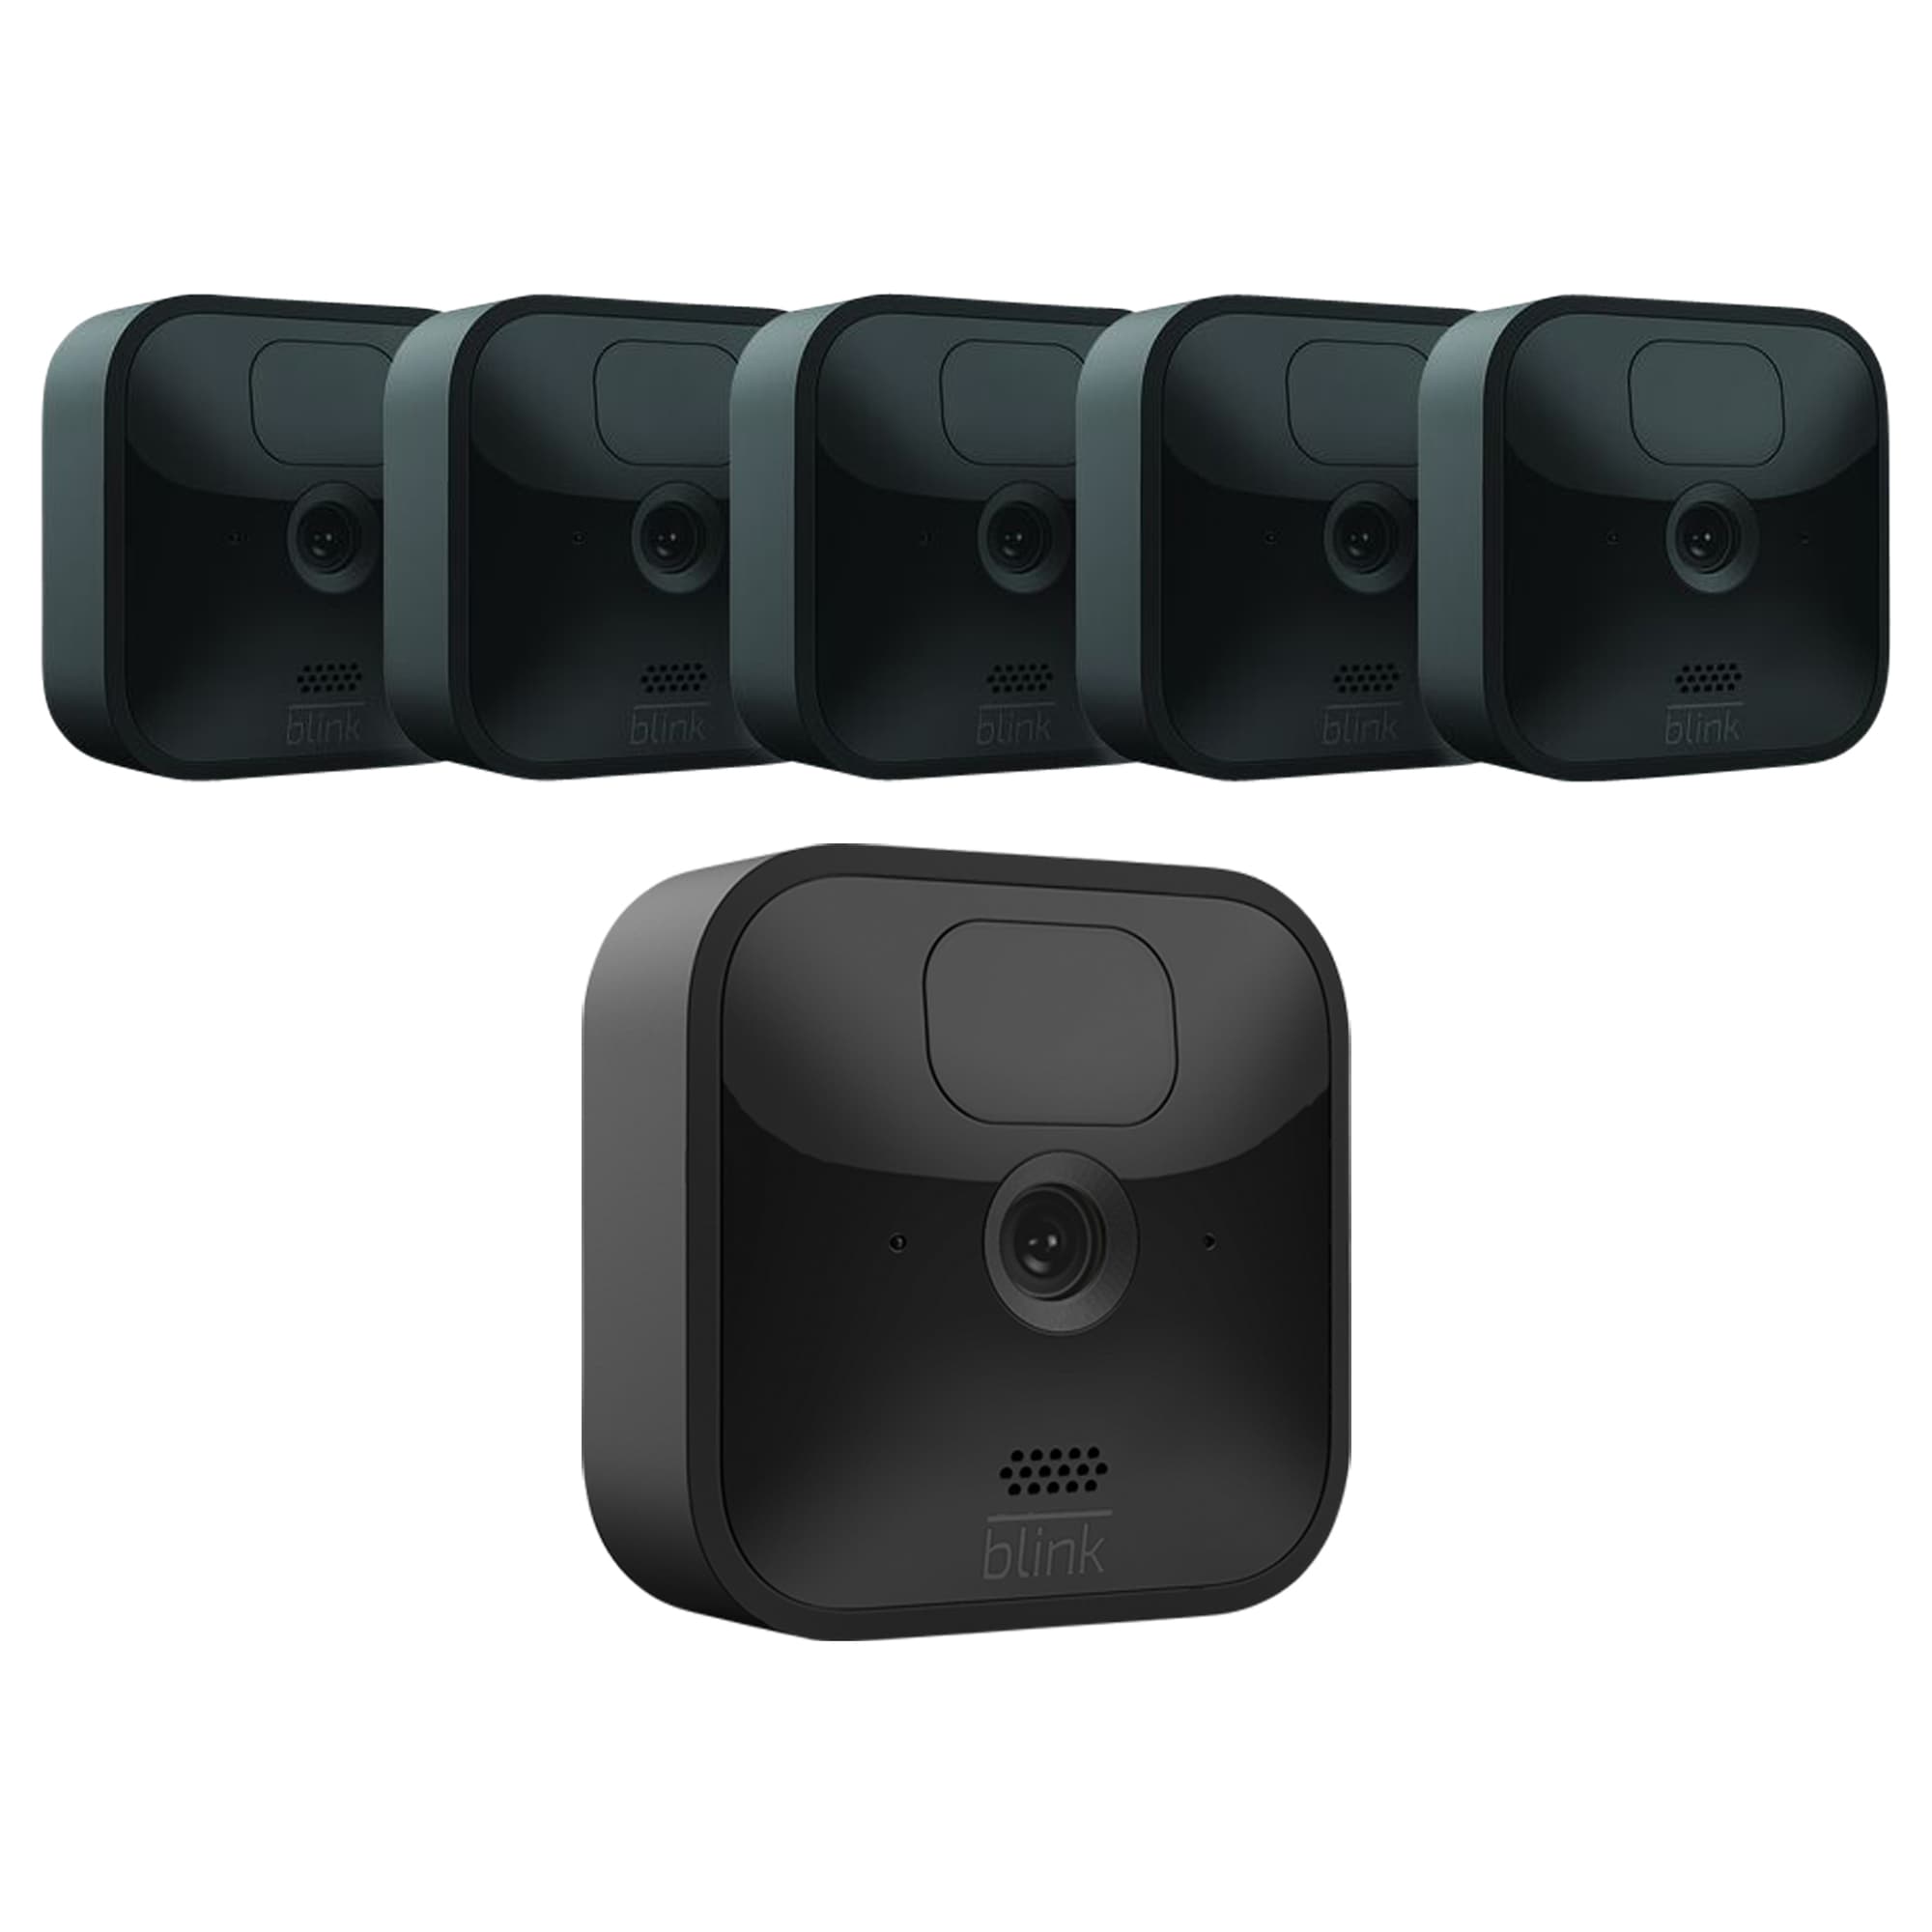 Blink cameras are still on sale for Black Friday for up to 60 percent off